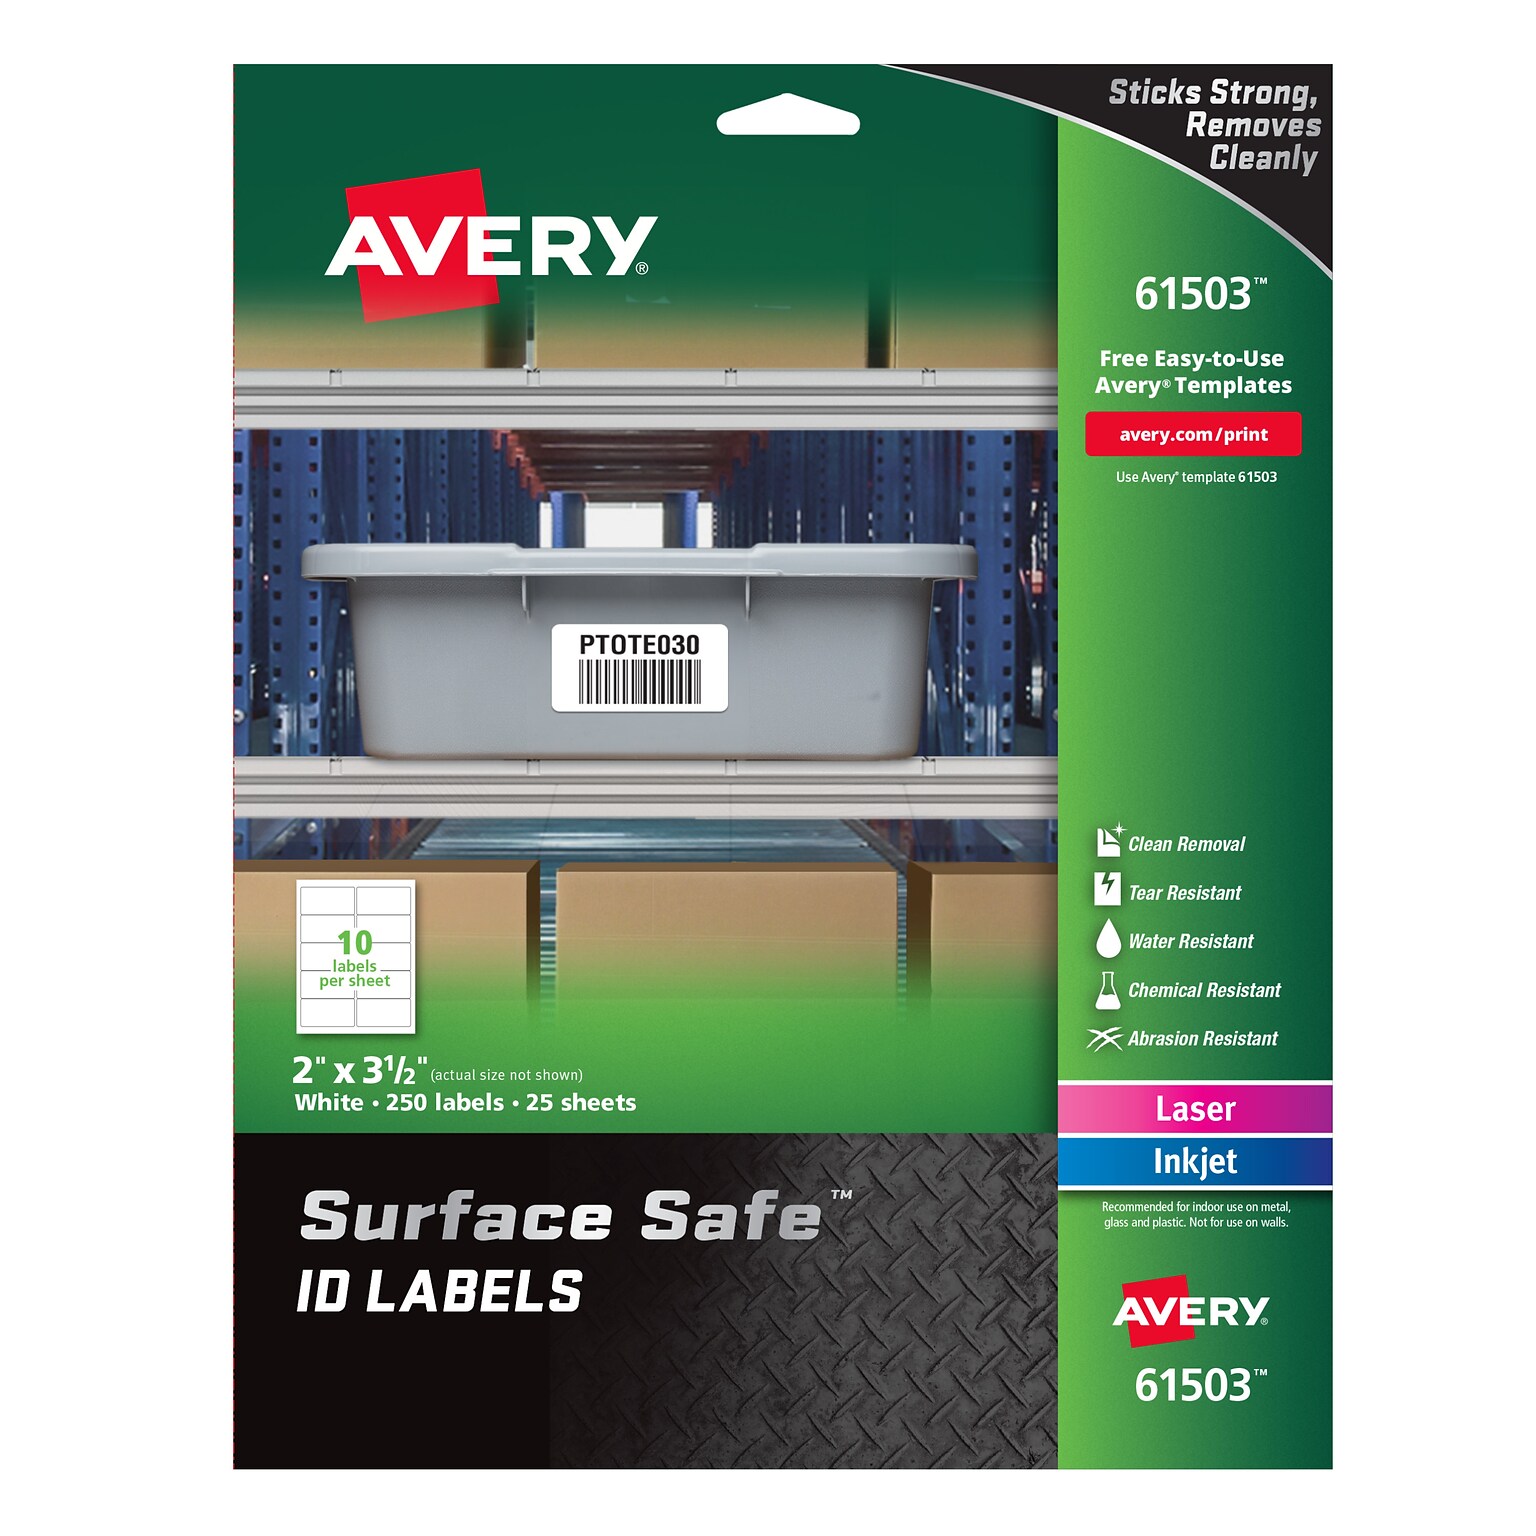 Avery Surface Safe Laser/Inkjet ID Labels, 2 x 3 1/2, White, 10 Labels/Sheet, 25 Sheets/Pack (61503)